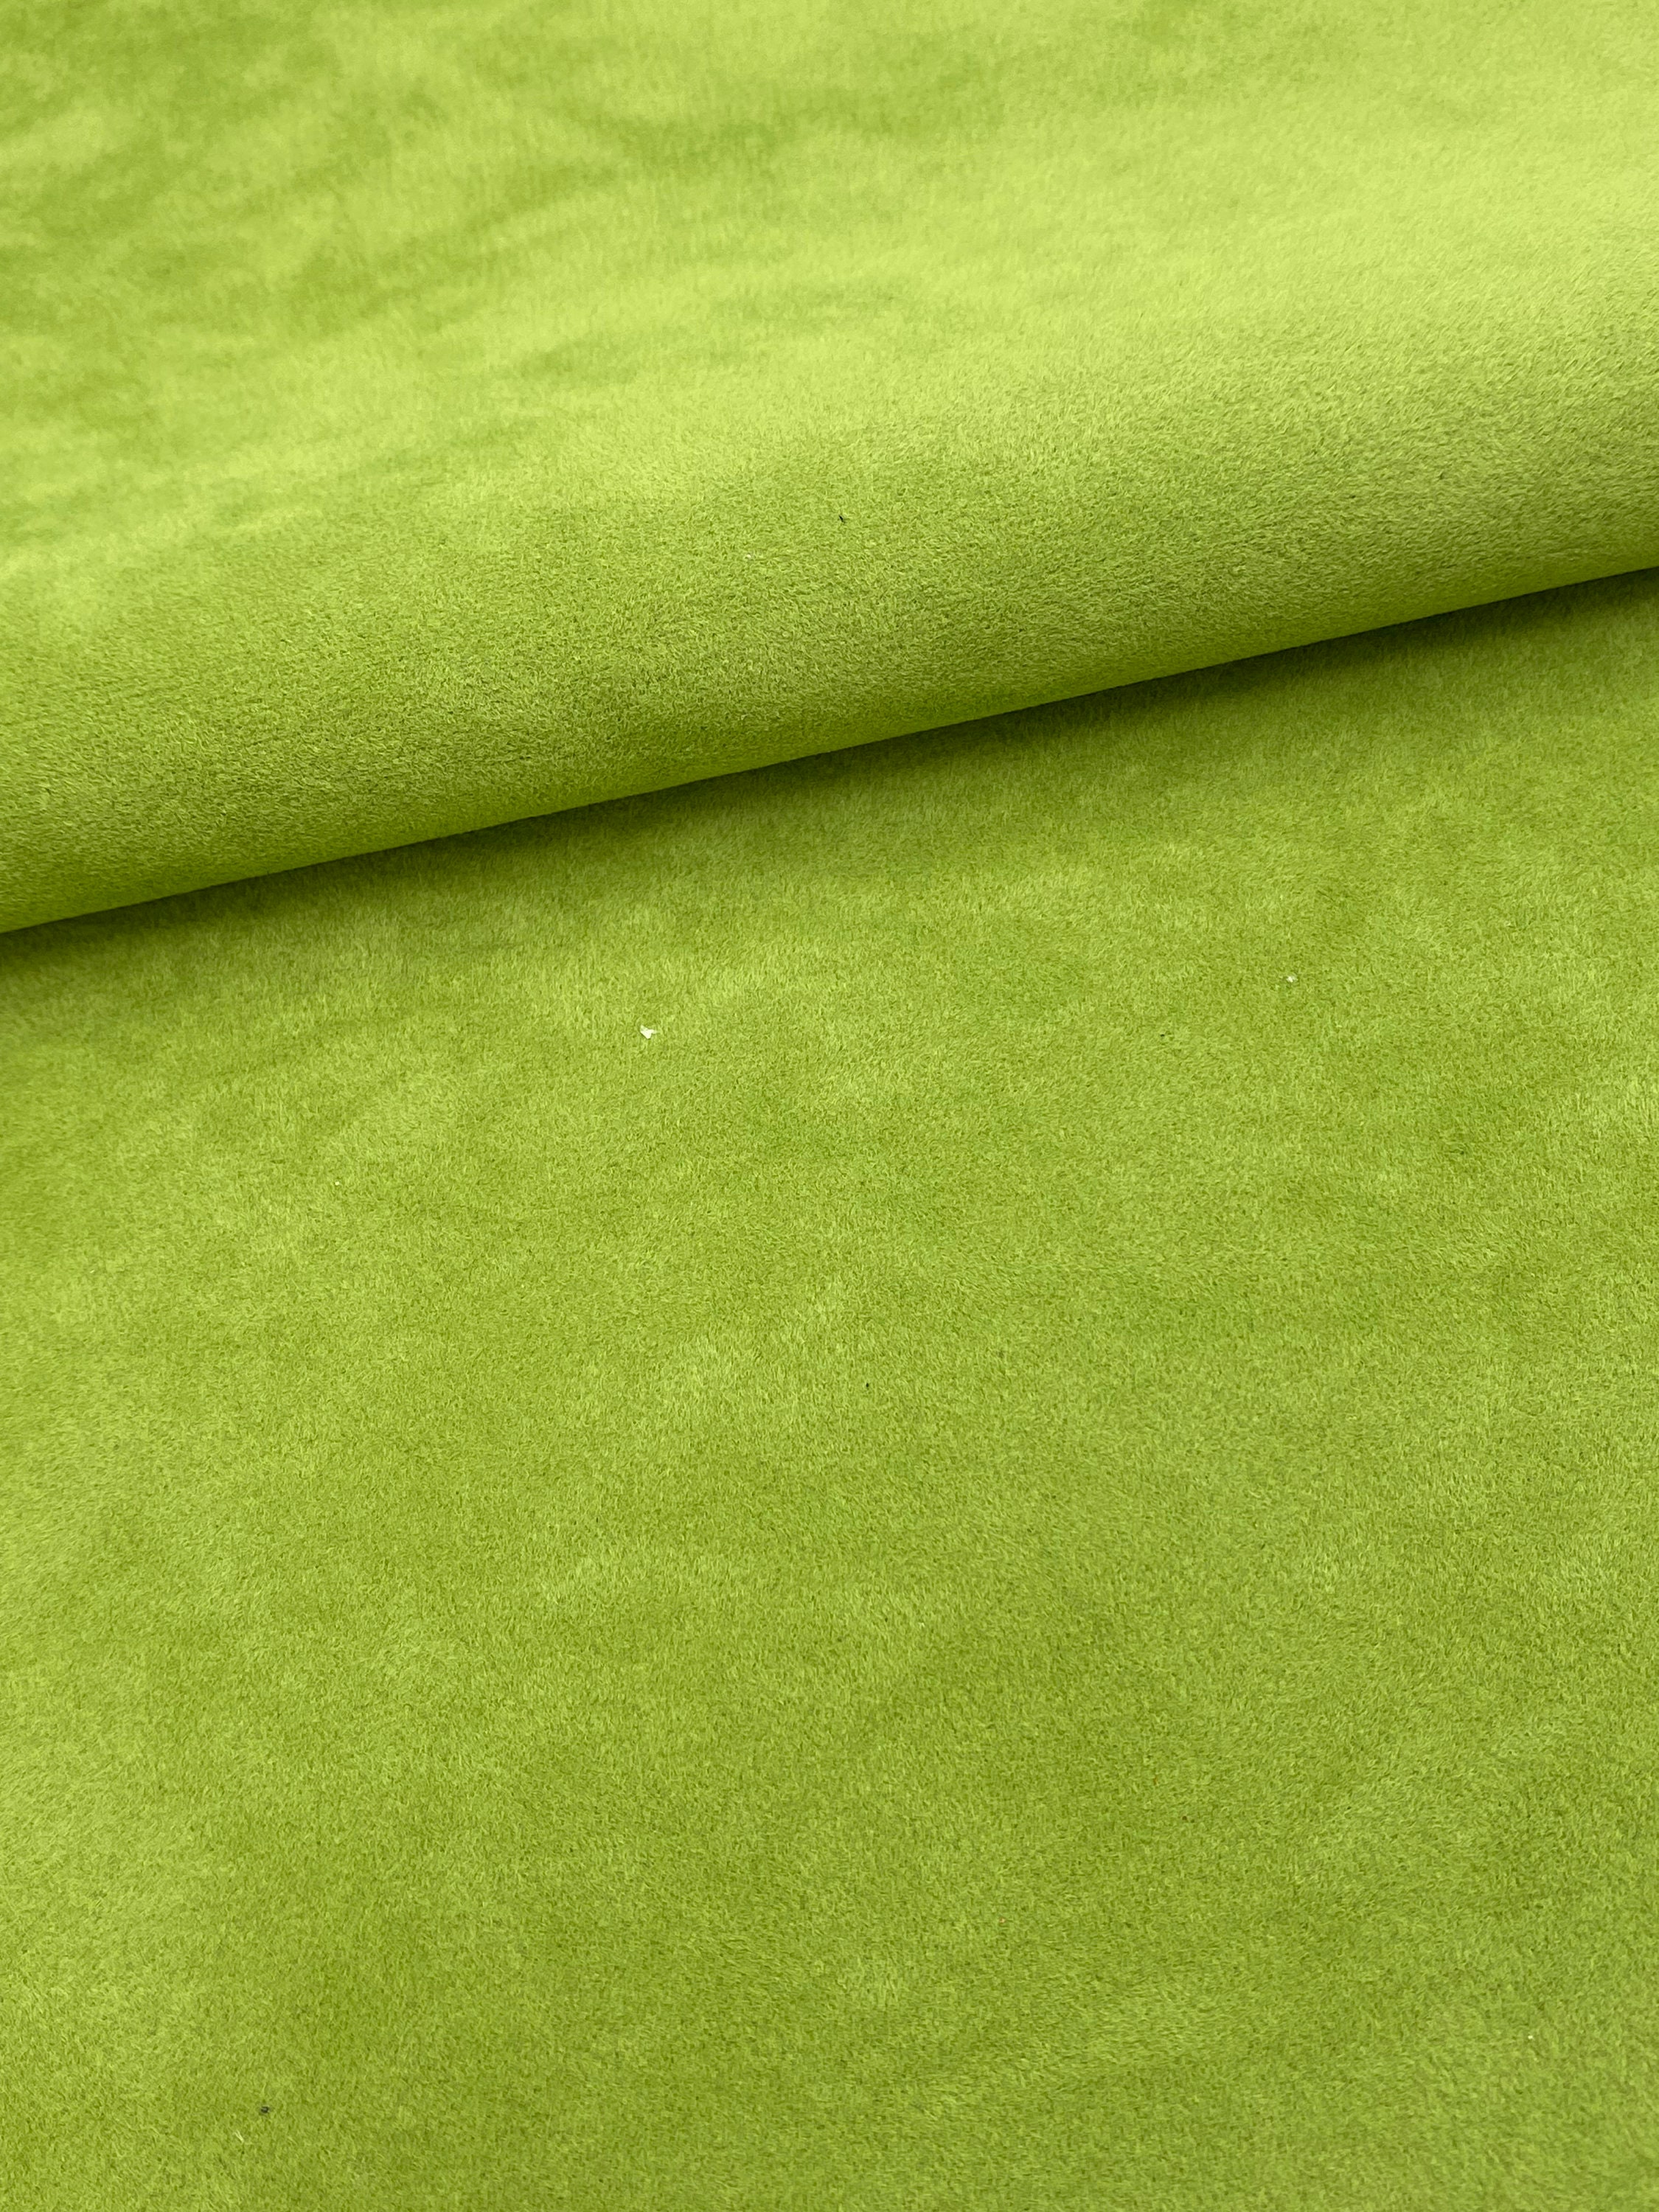 Green Suede Fabric Etsy 